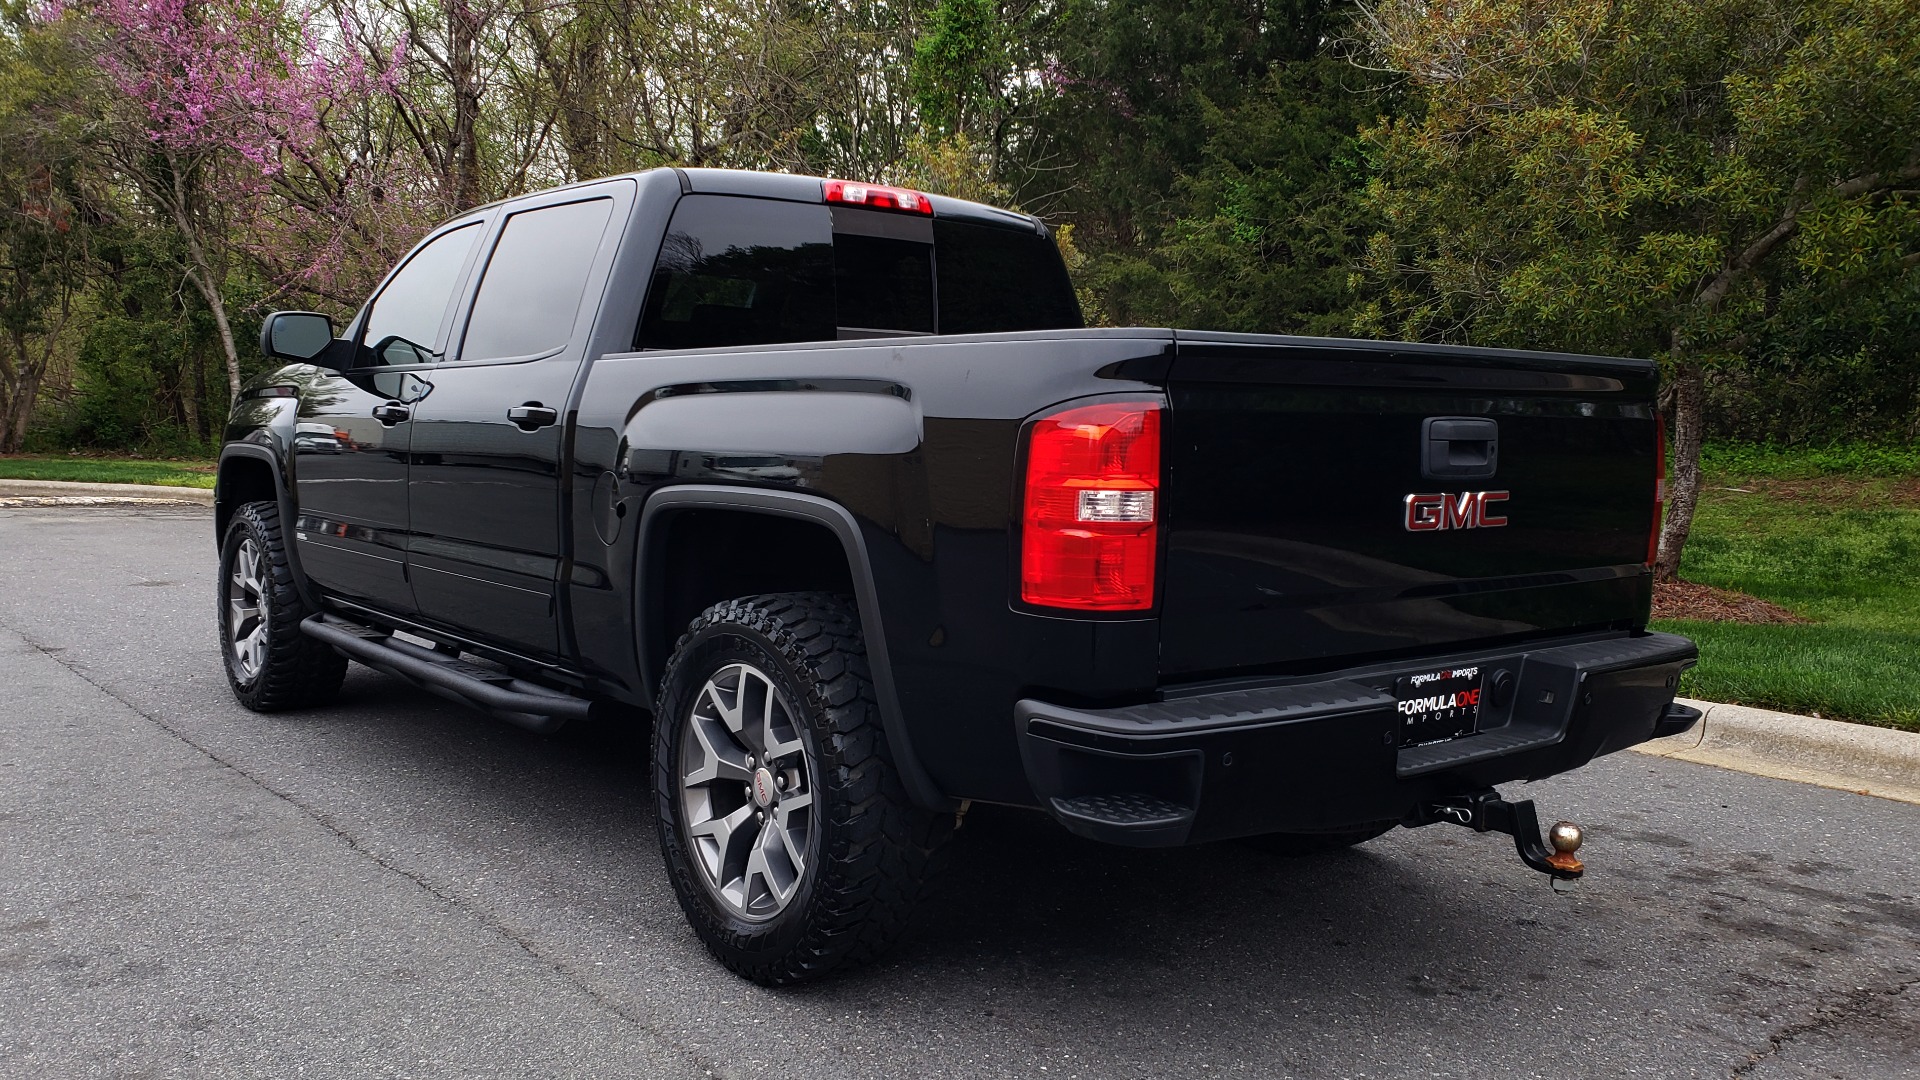 Used 2015 GMC SIERRA 1500 SLT 4WD CREW CAB / 6.2L V8 / NAV / BOSE / REARVIEW for sale Sold at Formula Imports in Charlotte NC 28227 3